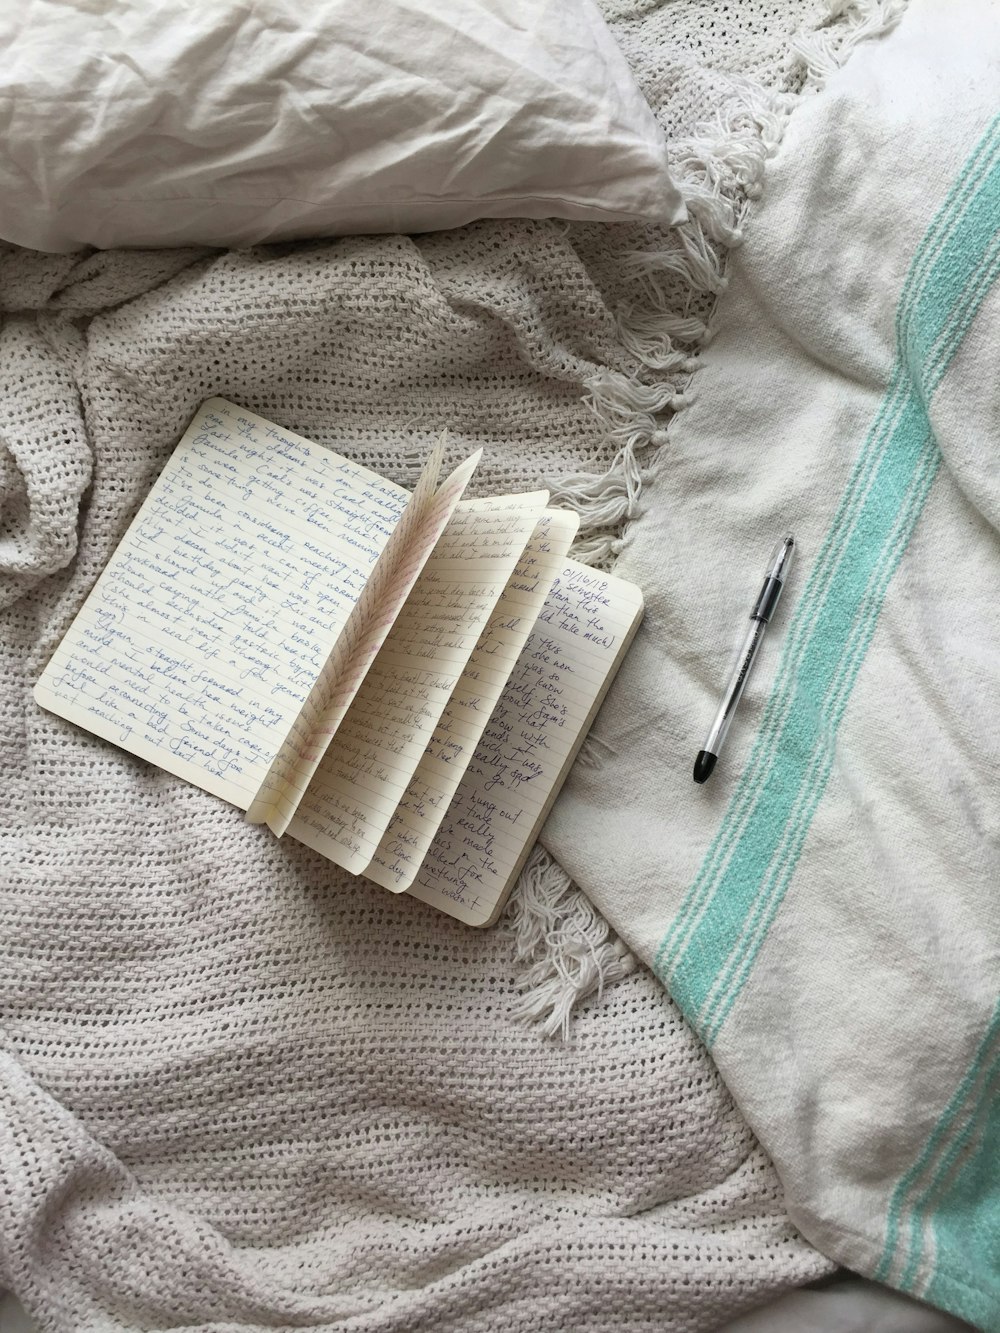 a book and a pen on a bed